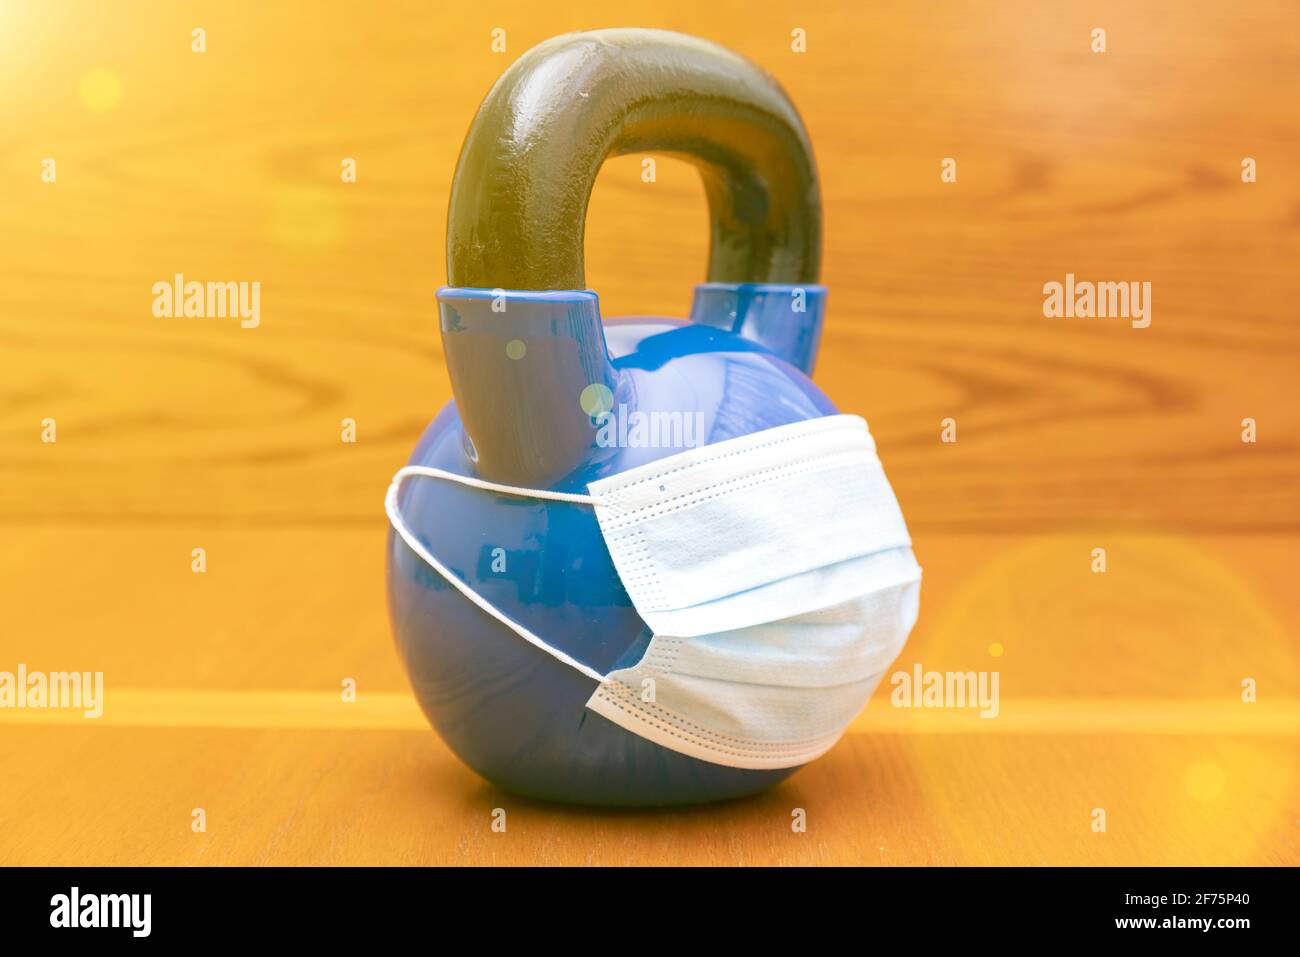 kettlebells on gym with blue surgical mask. Close up. Sports kettlebell in the gym, top view. kettlebell wearing blue medical mask. toned. copy space Stock Photo